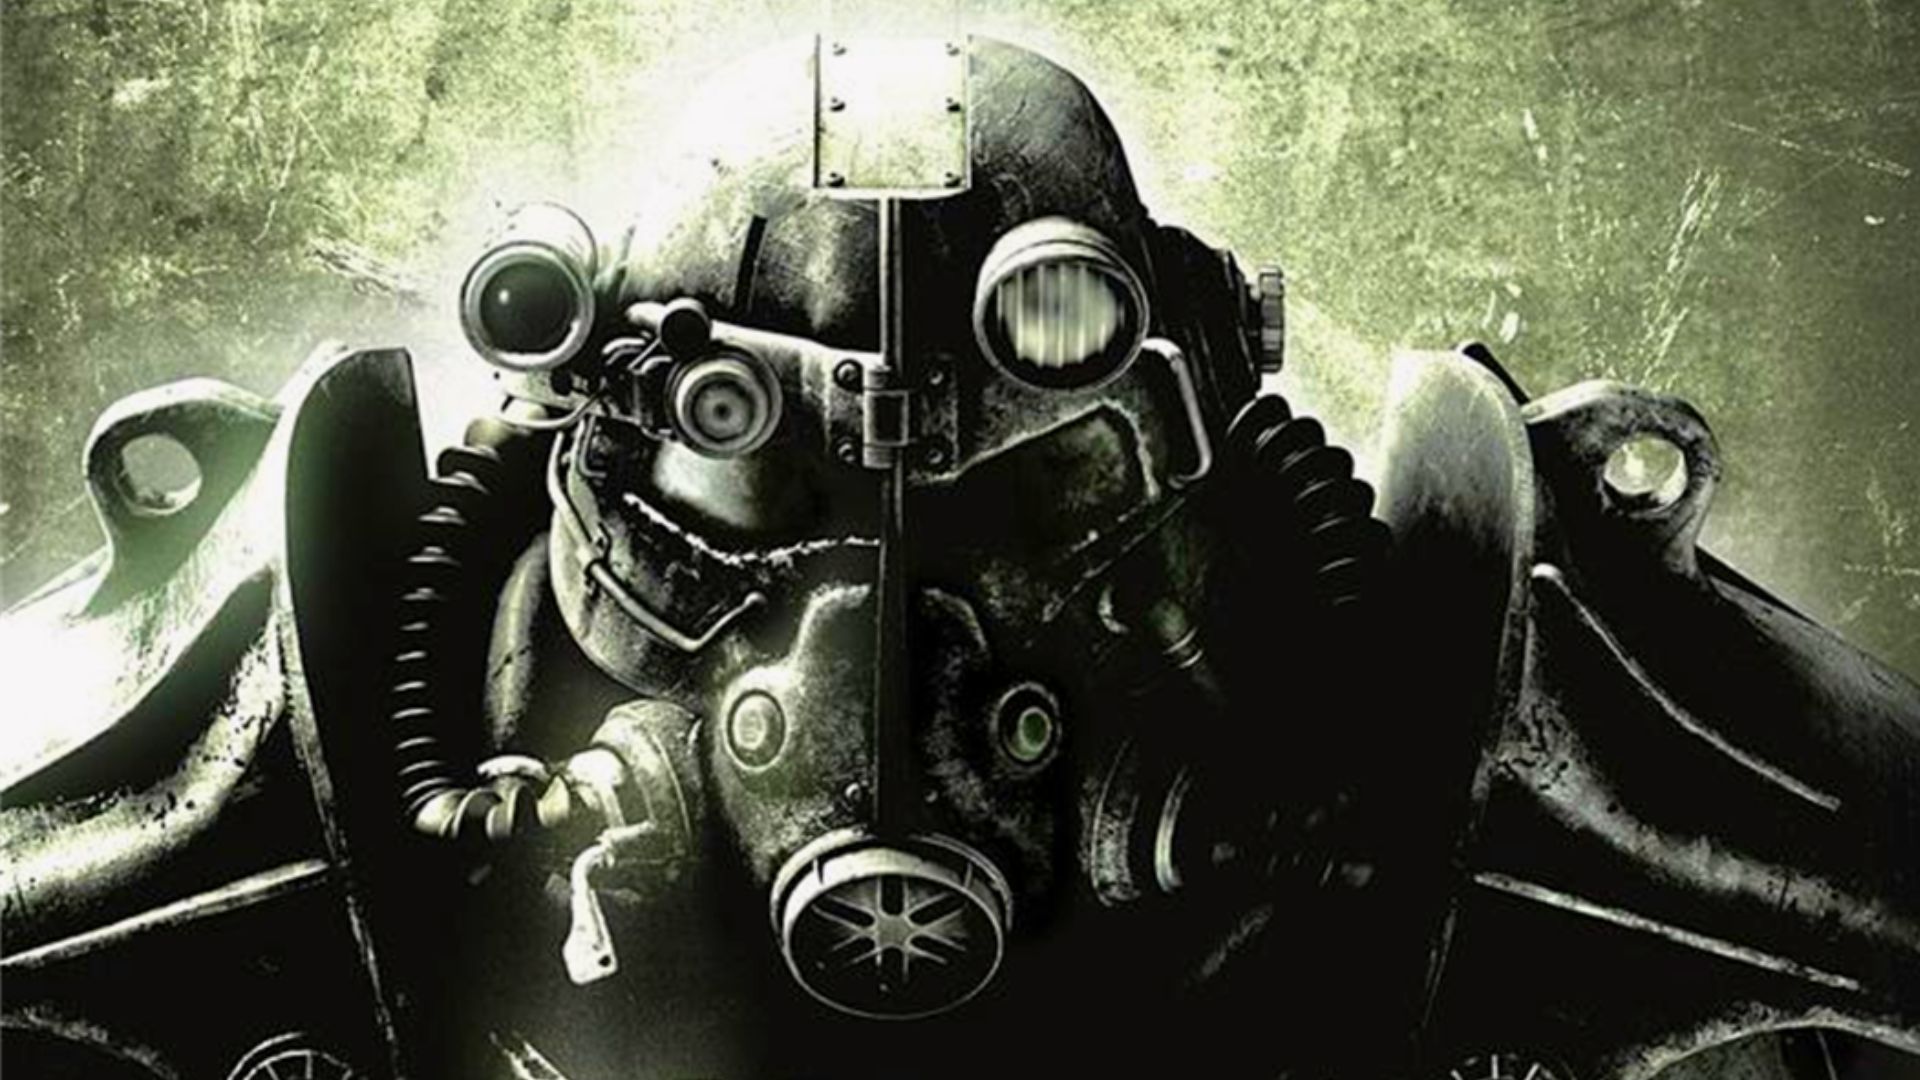 Fallout 3 remaster leads colossal Microsoft leak of unannounced games